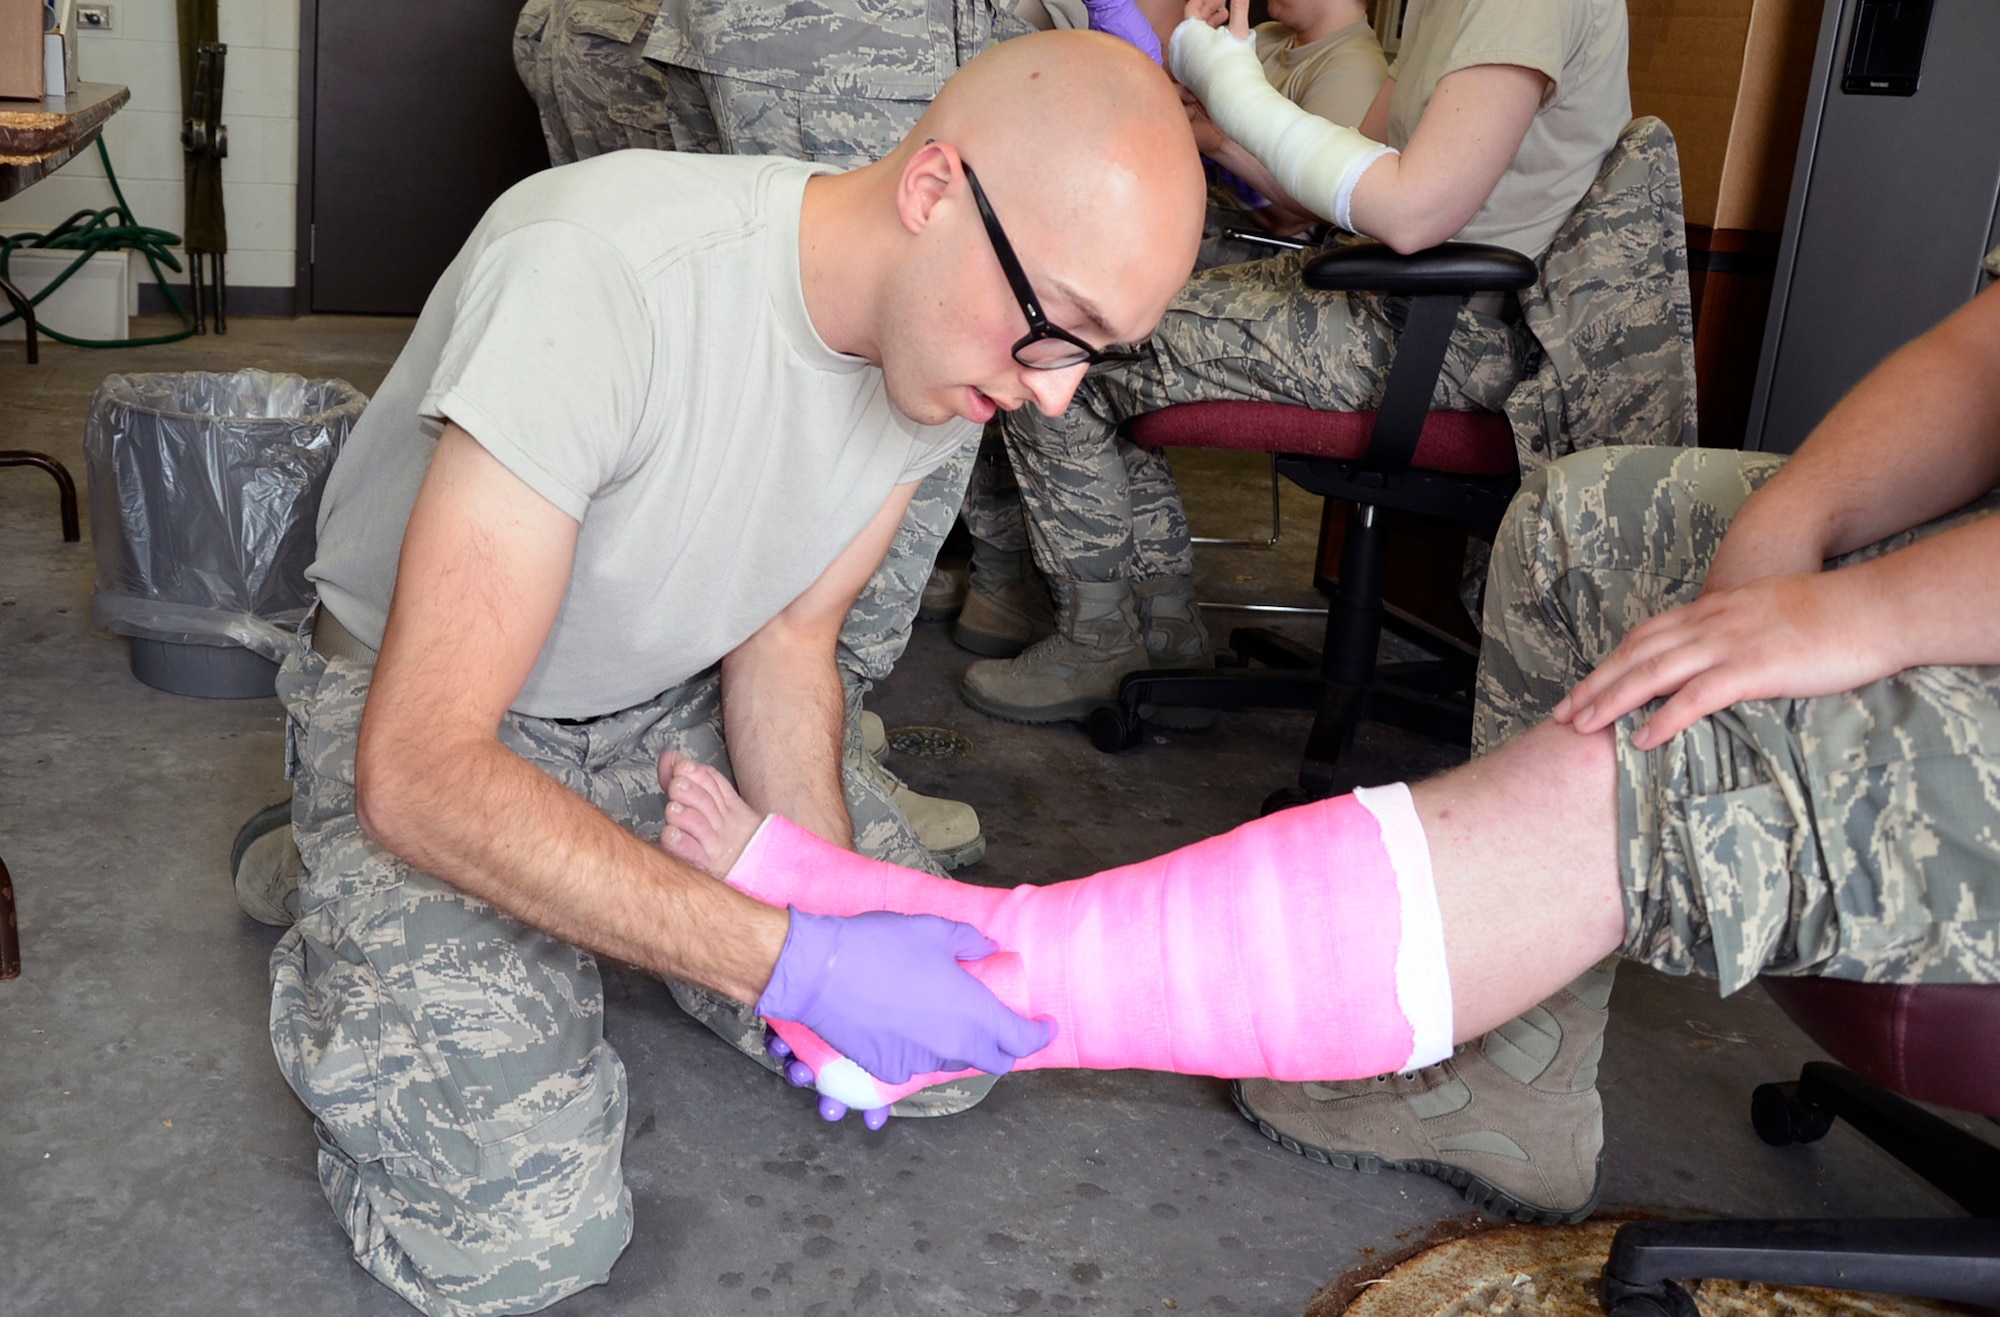 Senior Airman Devaroux Stanga, 114th Medical Group medic, applies a cast to the leg of Senior Airman Austin Meyers, also a medic, during annual training at Joe Foss Field, S.D. June 17, 2014.  Members of the 114th Fighter Wing are spending annual training at home station this year as part of the unit's Unit Effectiveness Inspection.  Medics with the unit will practice skills such as casting and suturing during their week of hands on training. (National Guard photo by Senior Master Sgt. Nancy Ausland/Released)